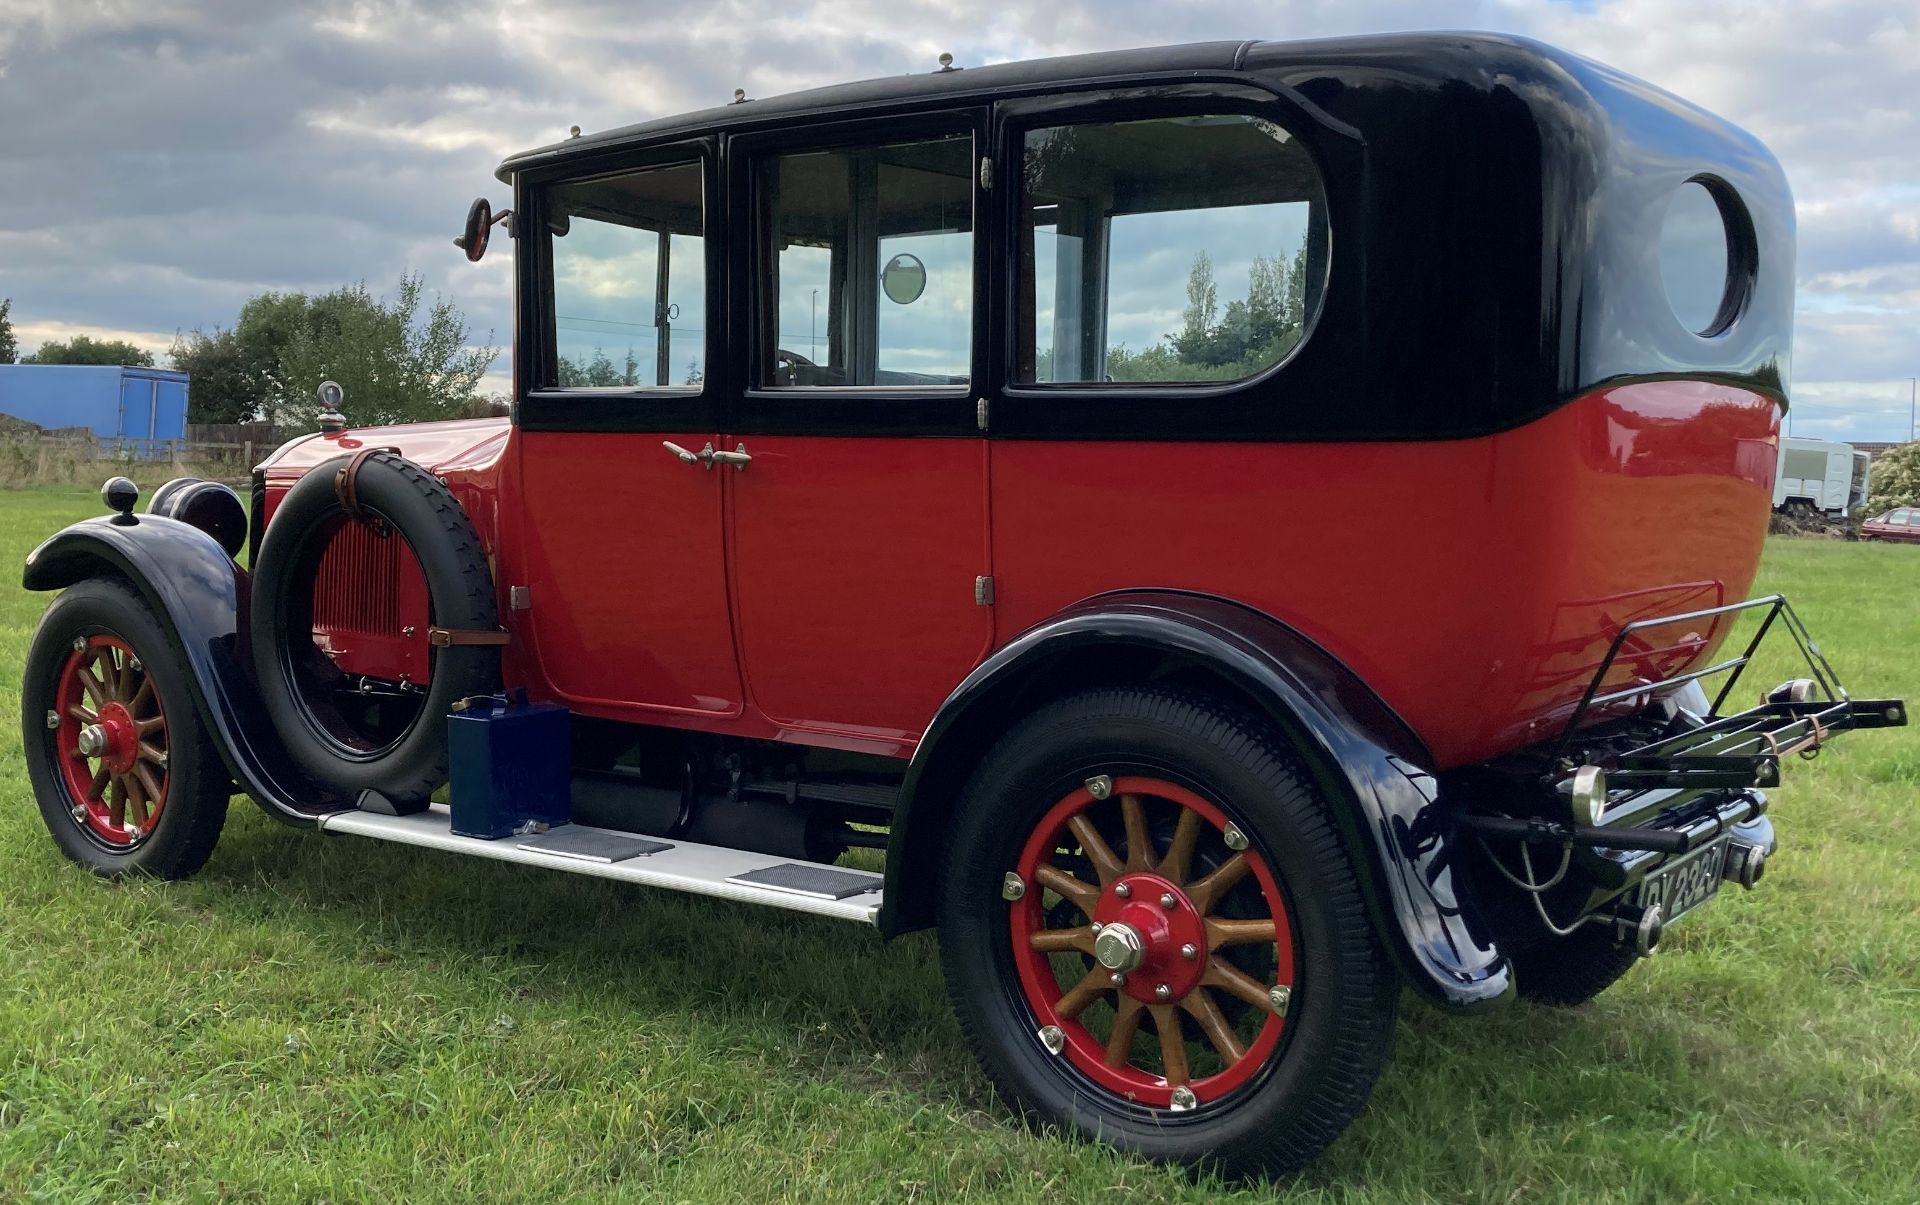 HISTORIC VEHICLE - 1924 BUICK McLAUGHLIN LIMOUSINE - Petrol - Red/Black - Blue/grey cloth interior. - Image 6 of 30